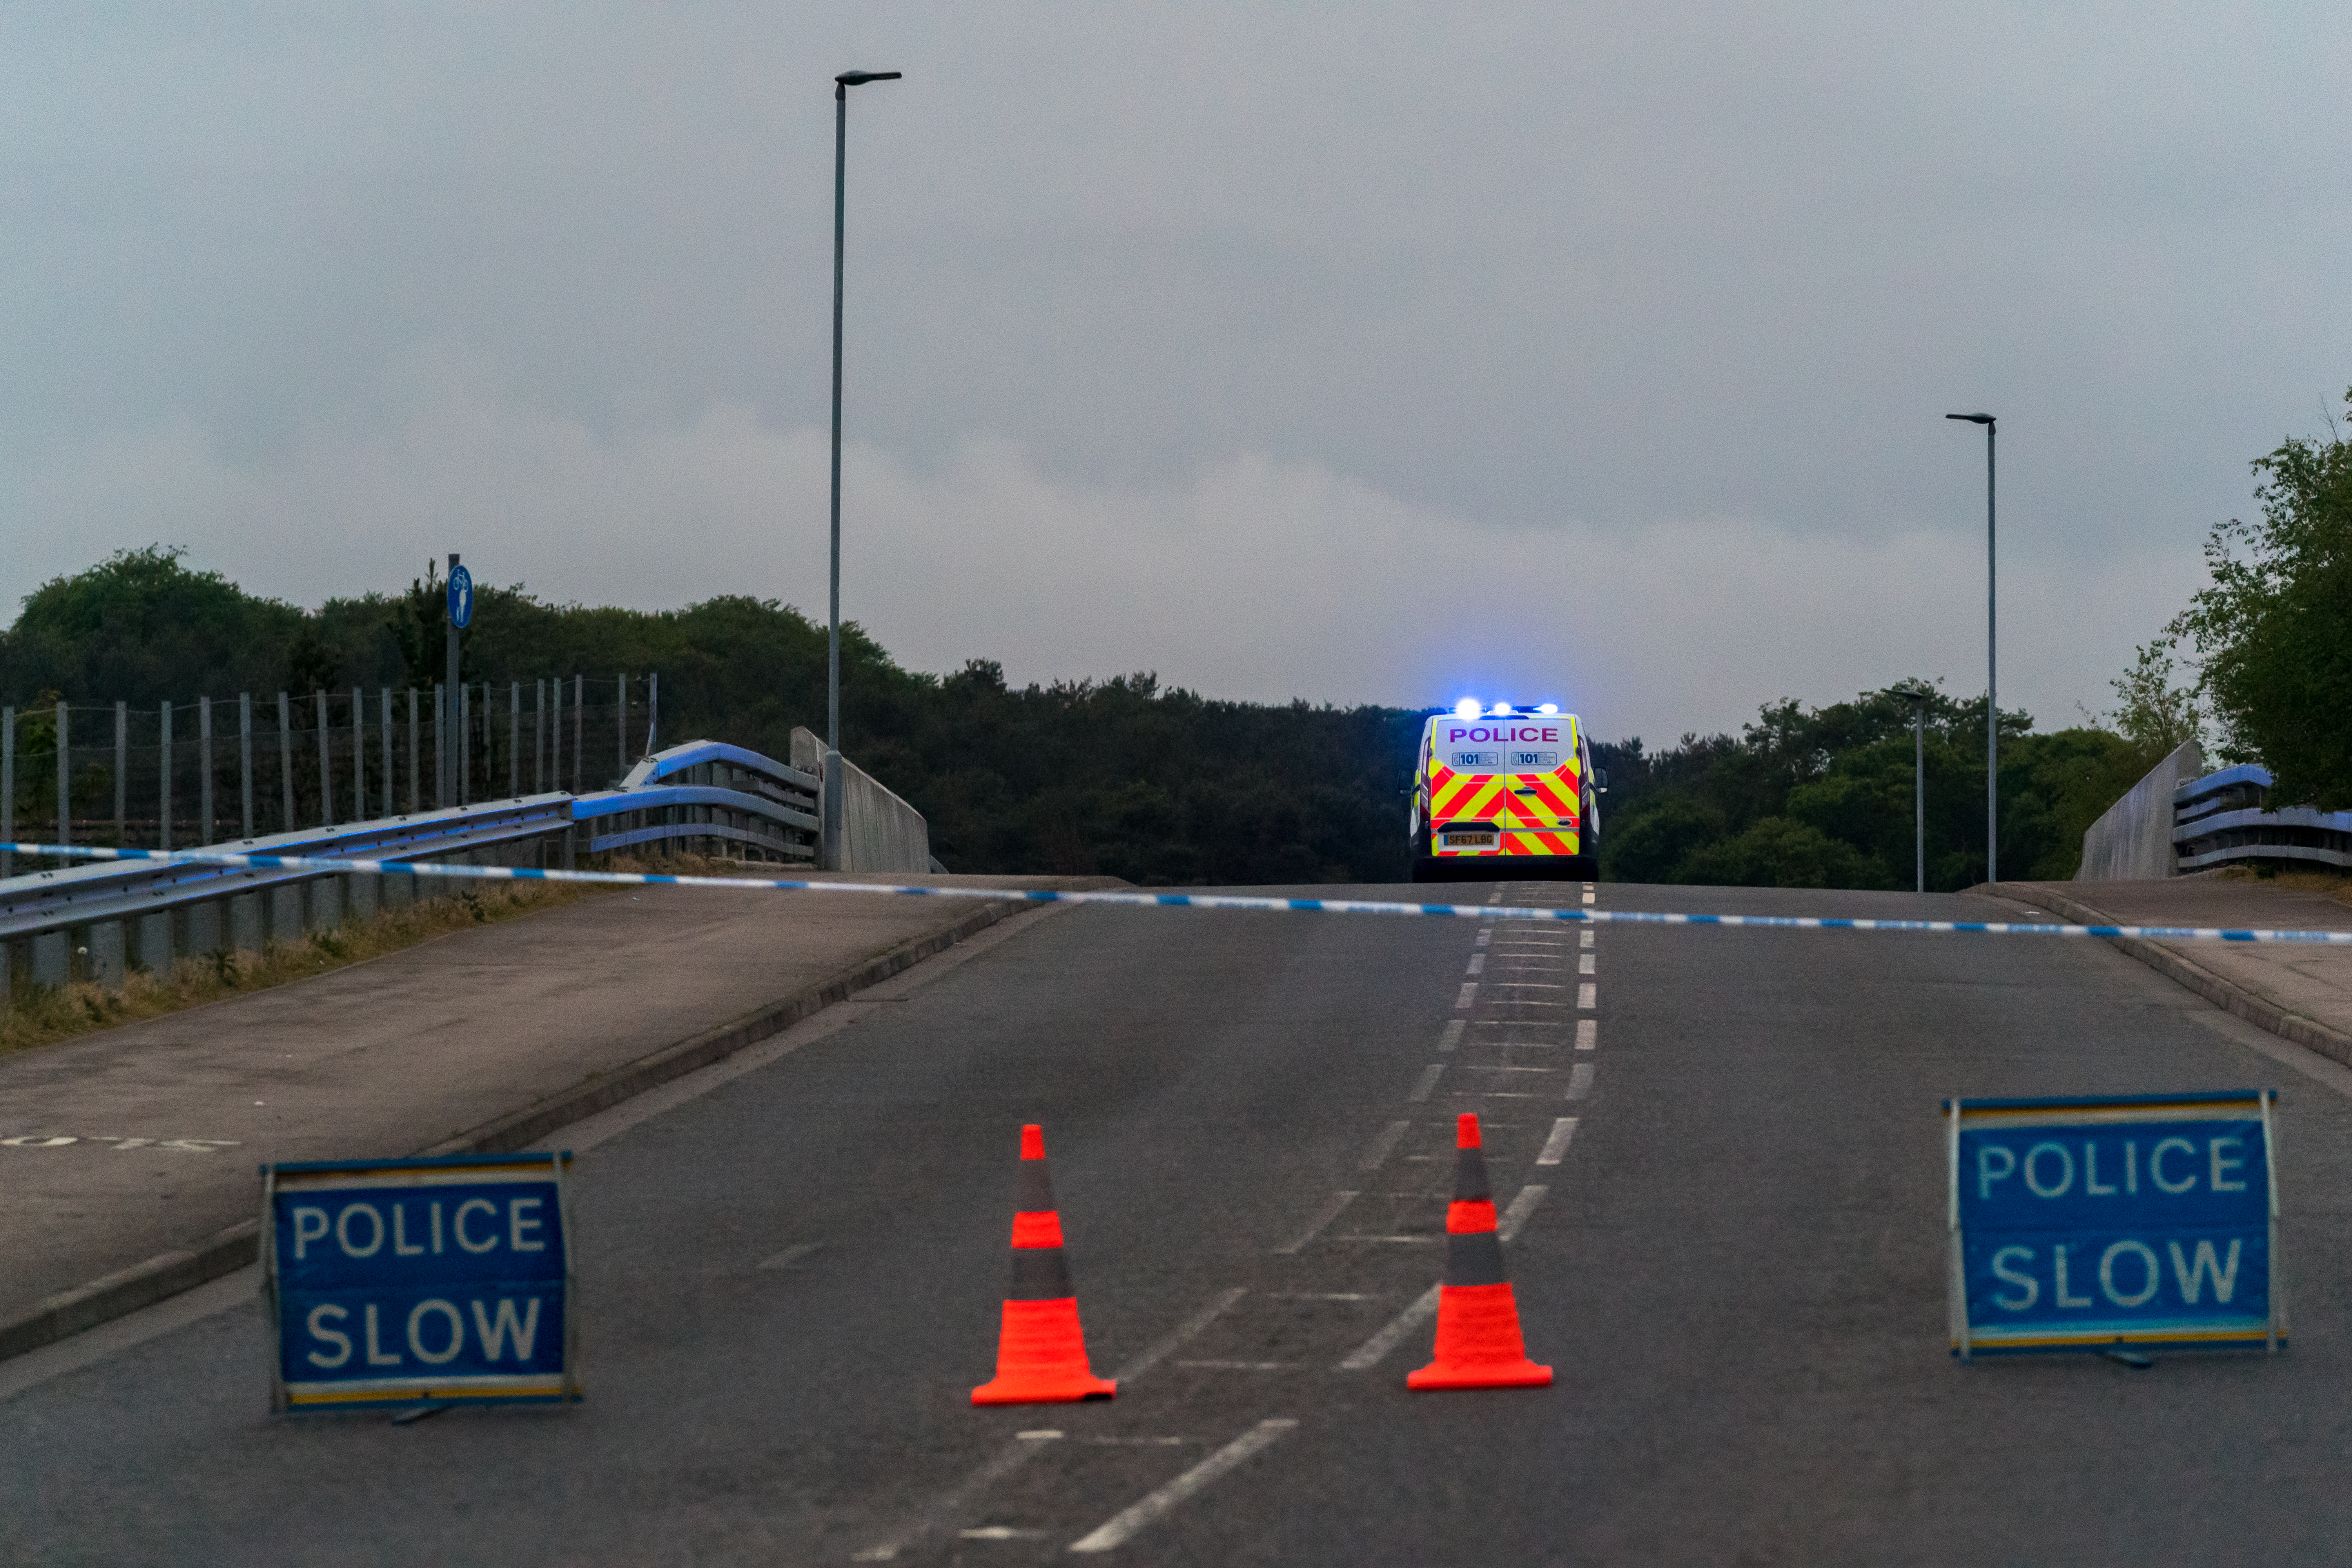 The scene at Reiket Lane, Elgin, following the incident.